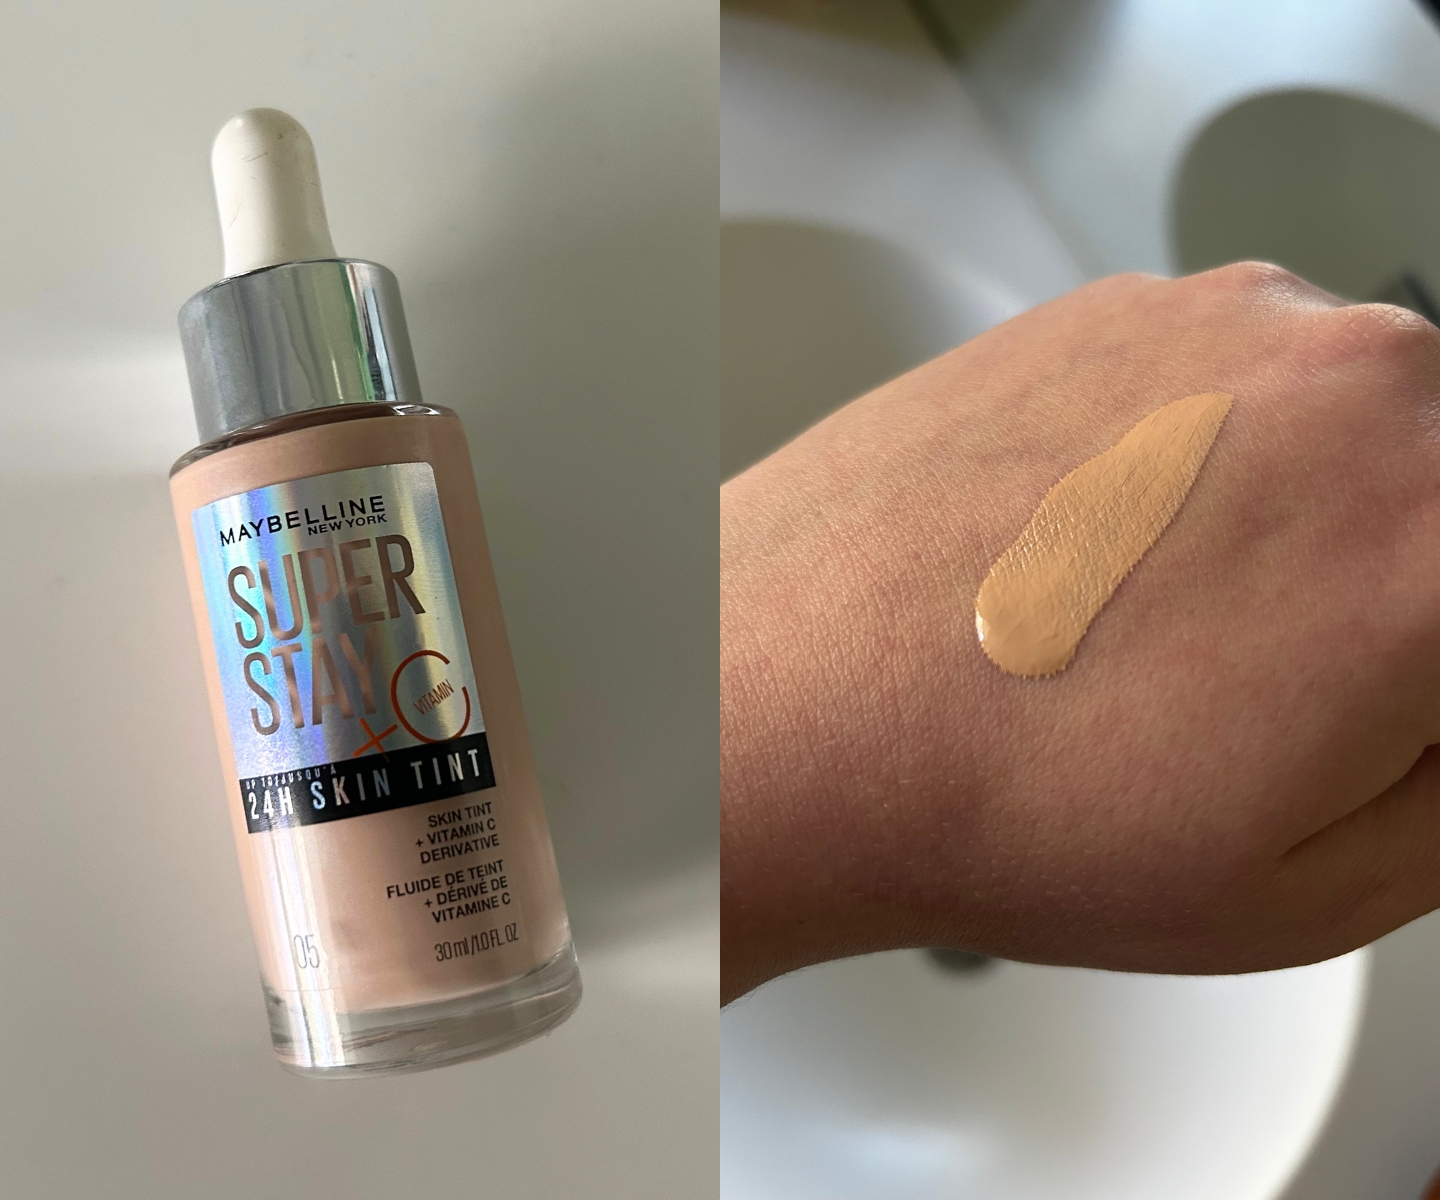 I tried Maybelline's viral Skin Tint and here are my honest thoughts